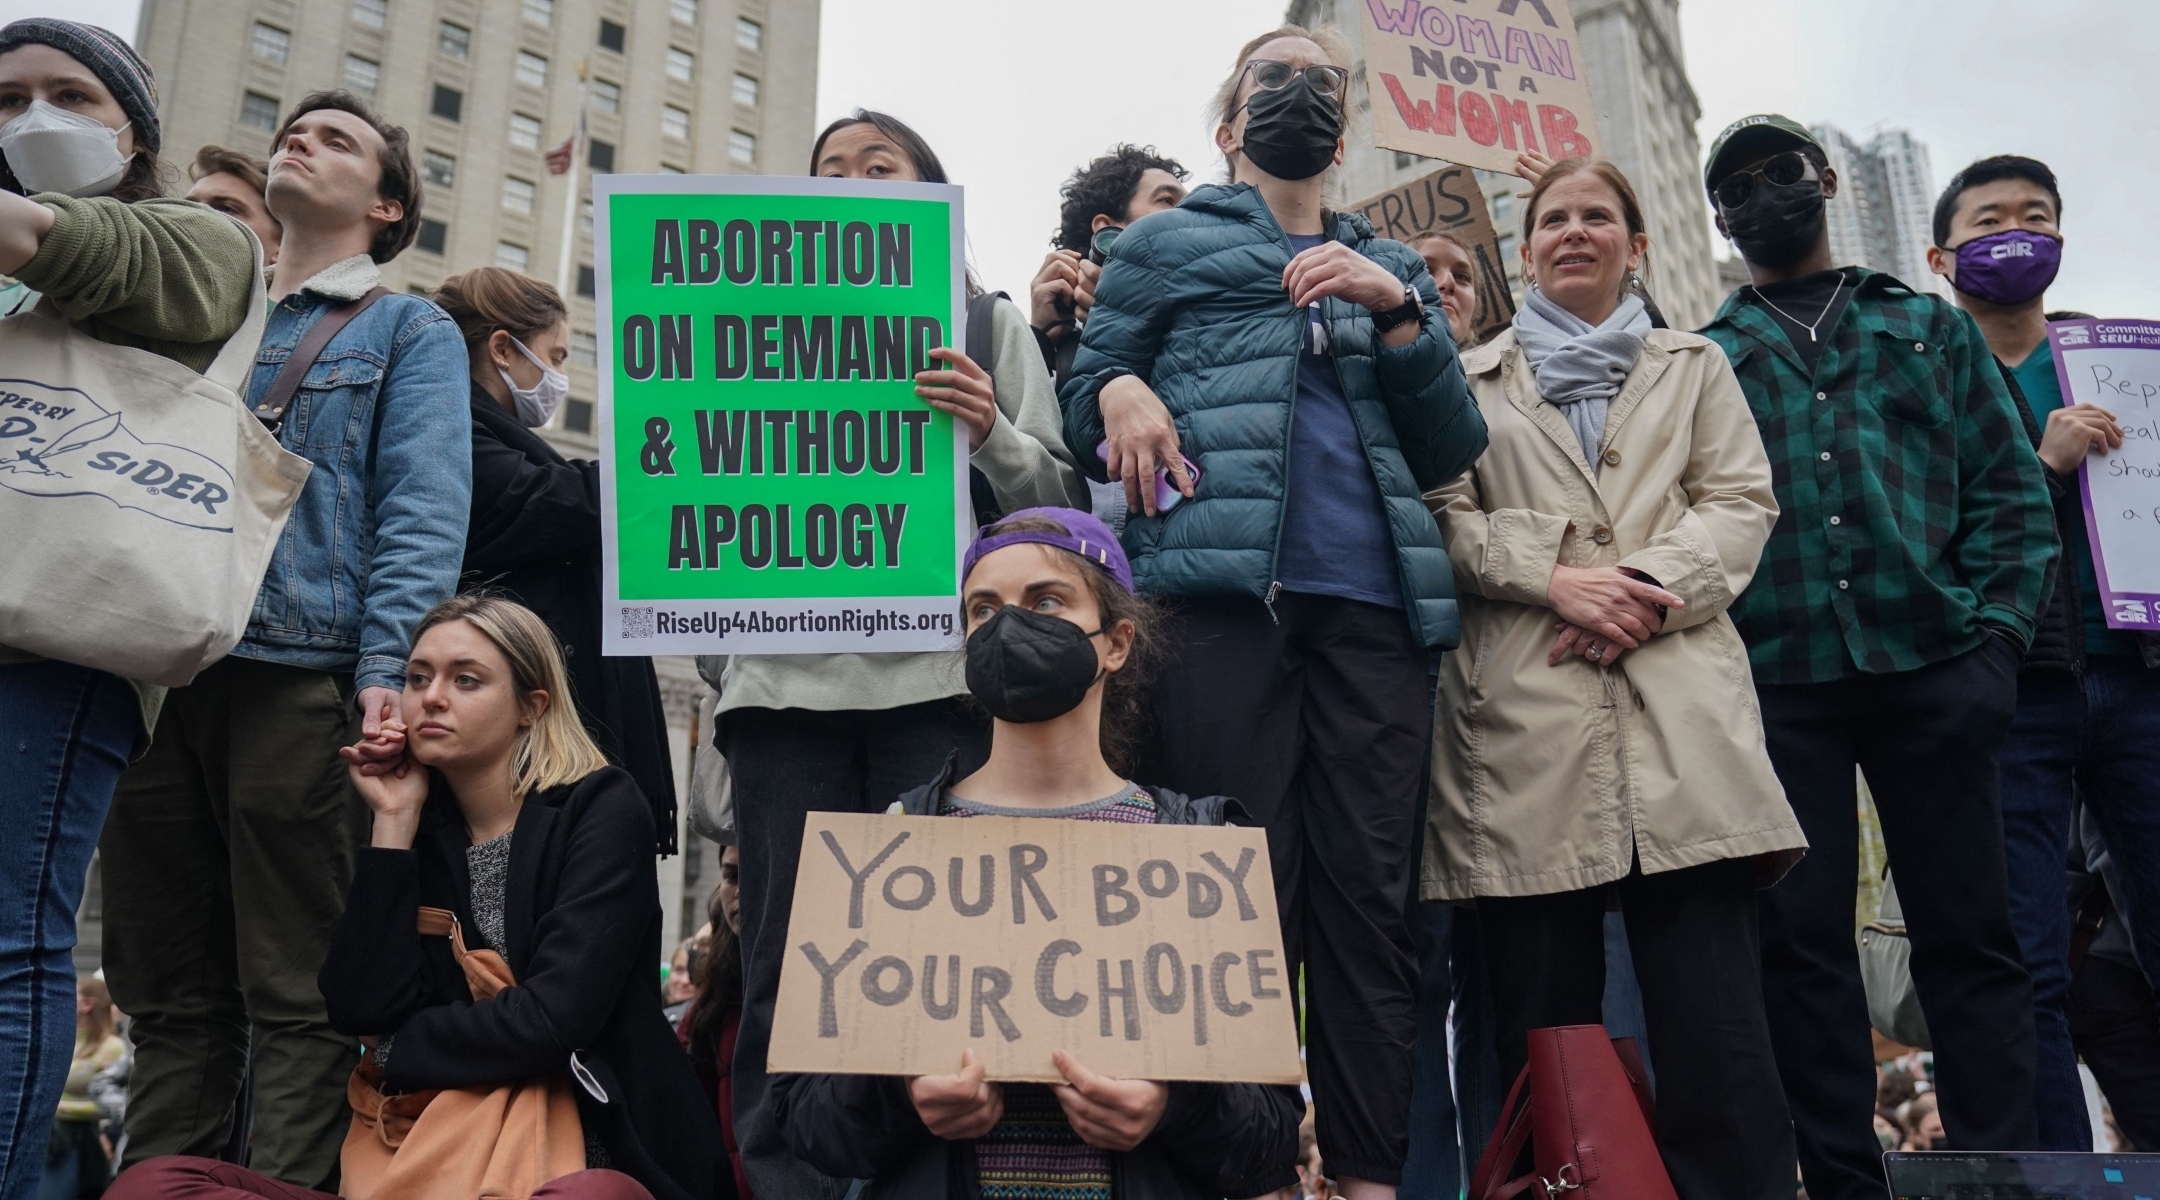 People protest in reaction to the leak of the Supreme Court draft abortion ruling, in New York City, May 3, 2022. (Bryan R. Smith/AFP via Getty Images)